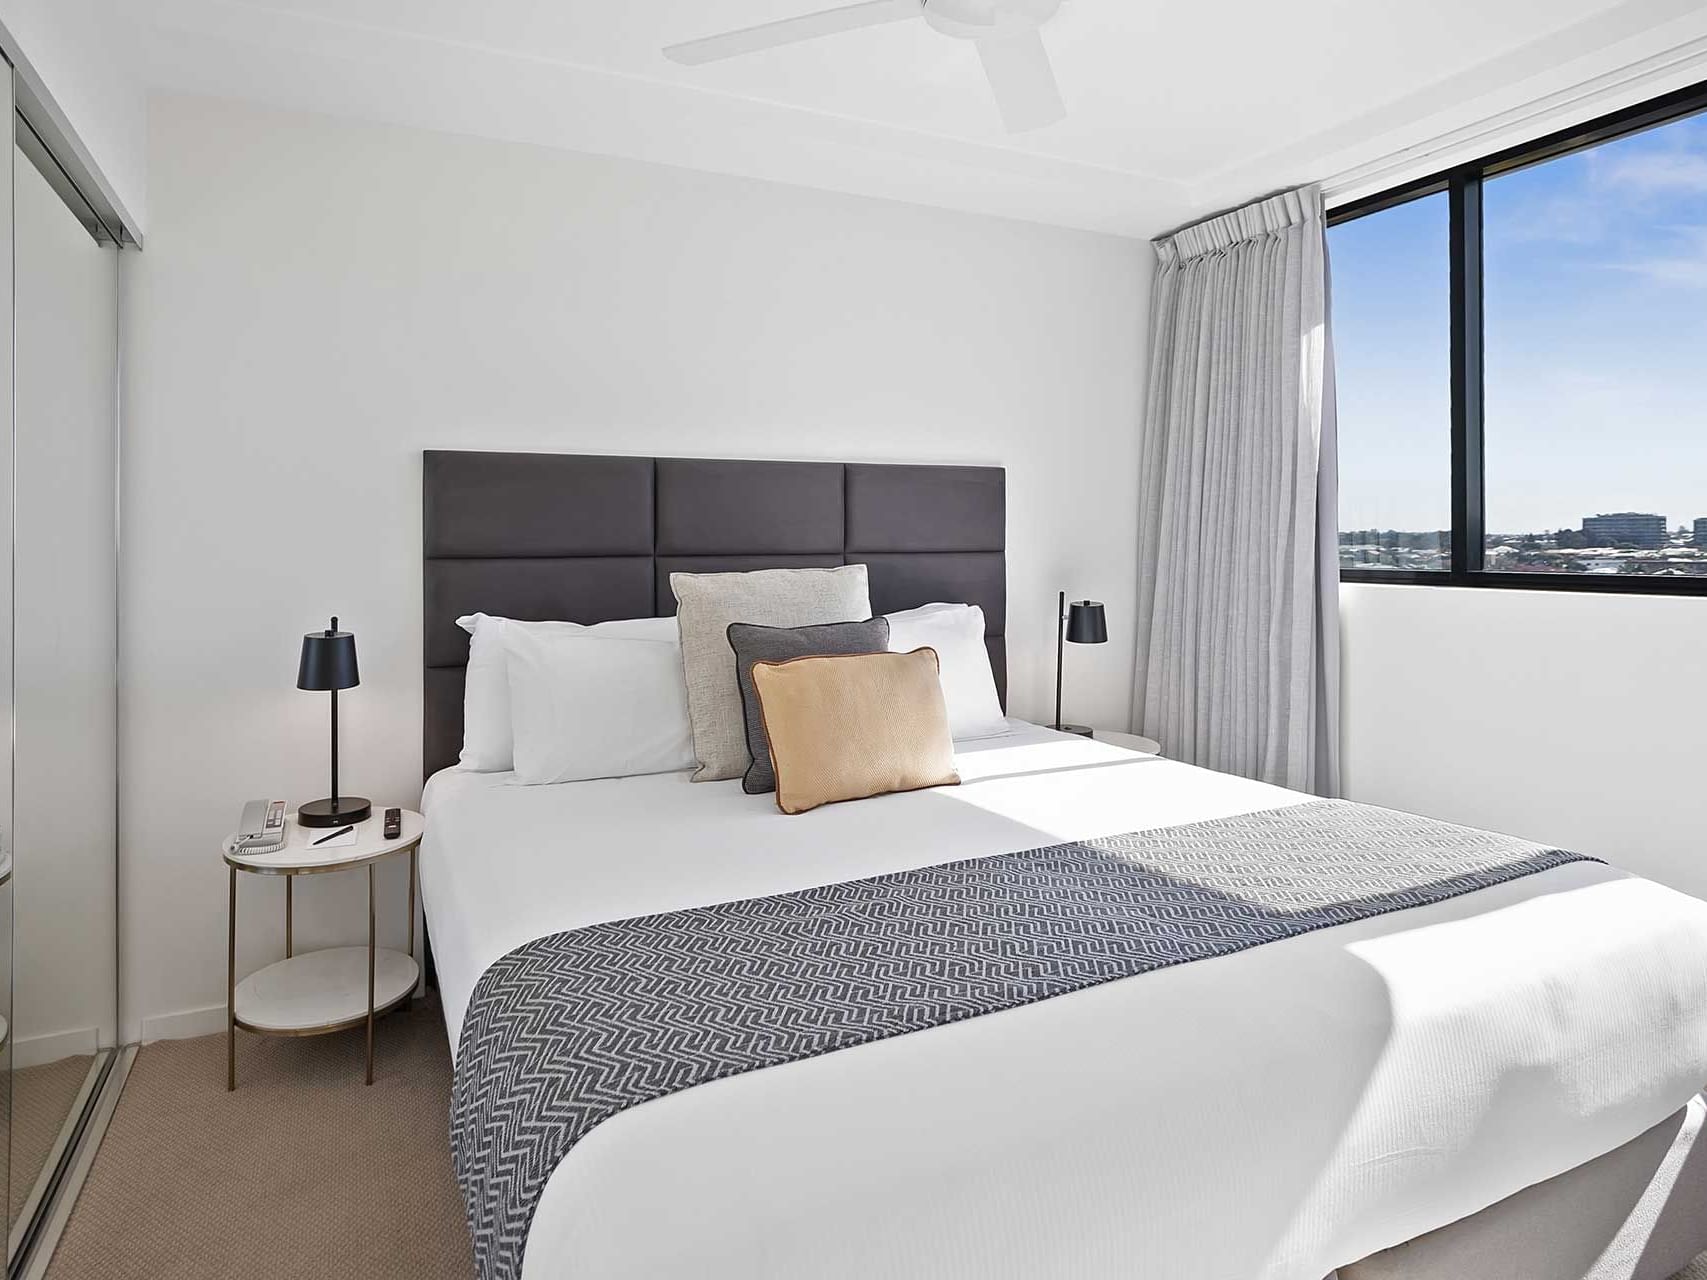 King bed in One Bedroom Apartment at Alcyone Hotel Residences which supplies Accommodation in Brisbane CBD